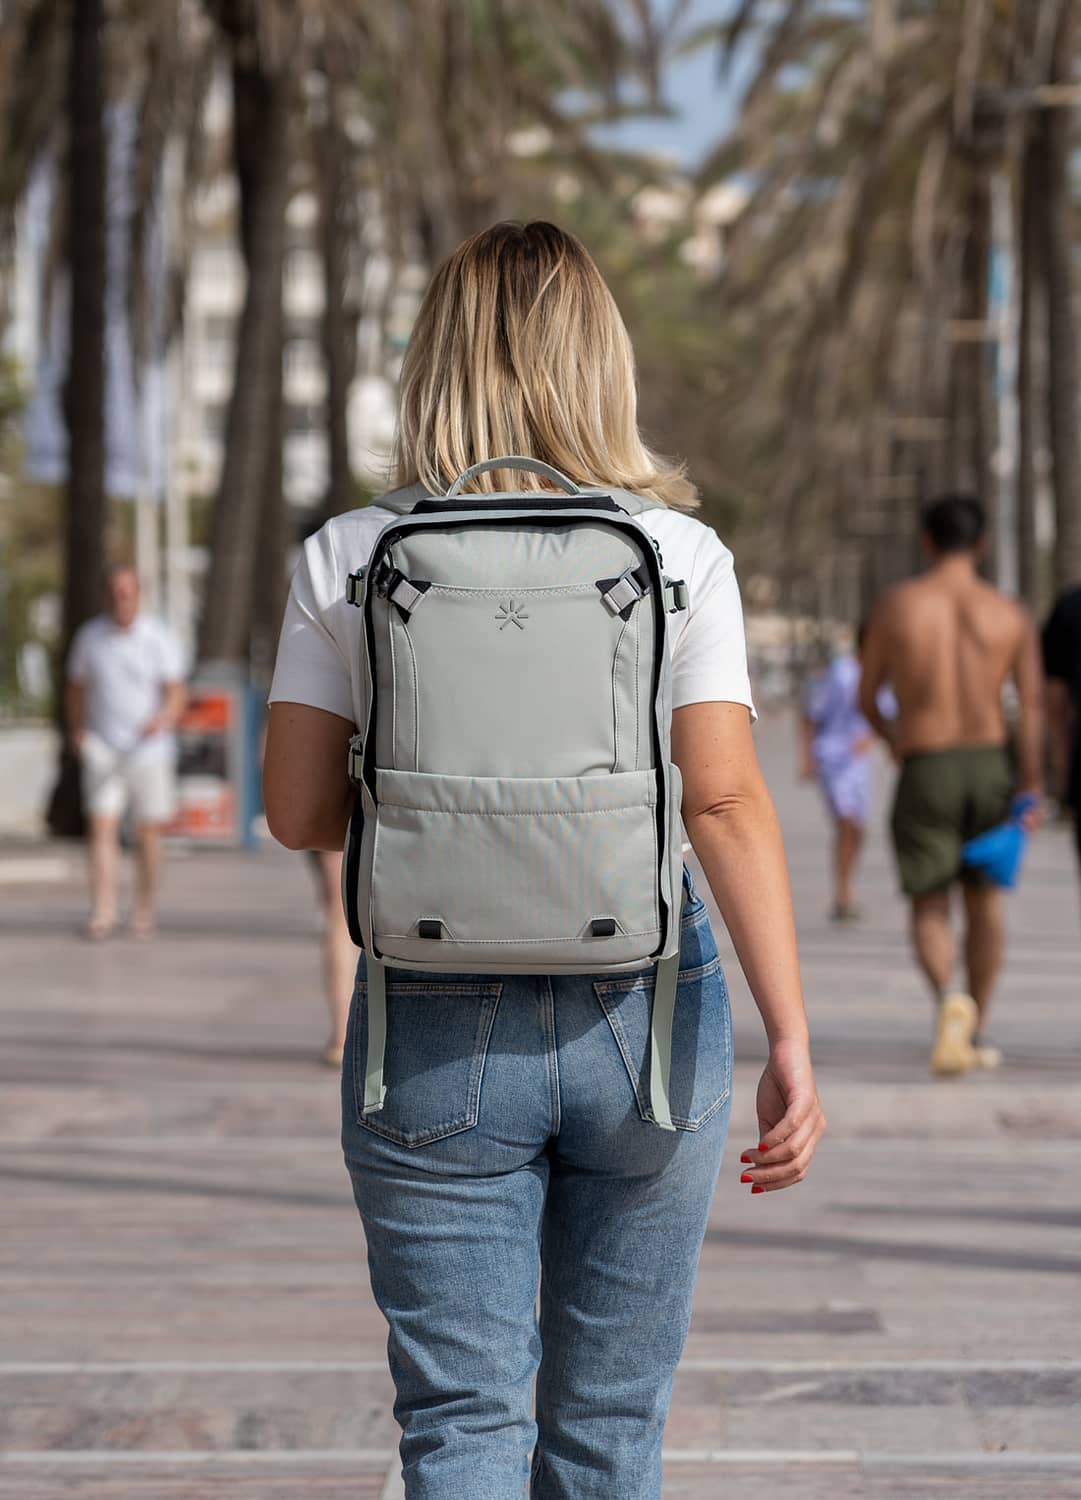 Best backpack for work and travel